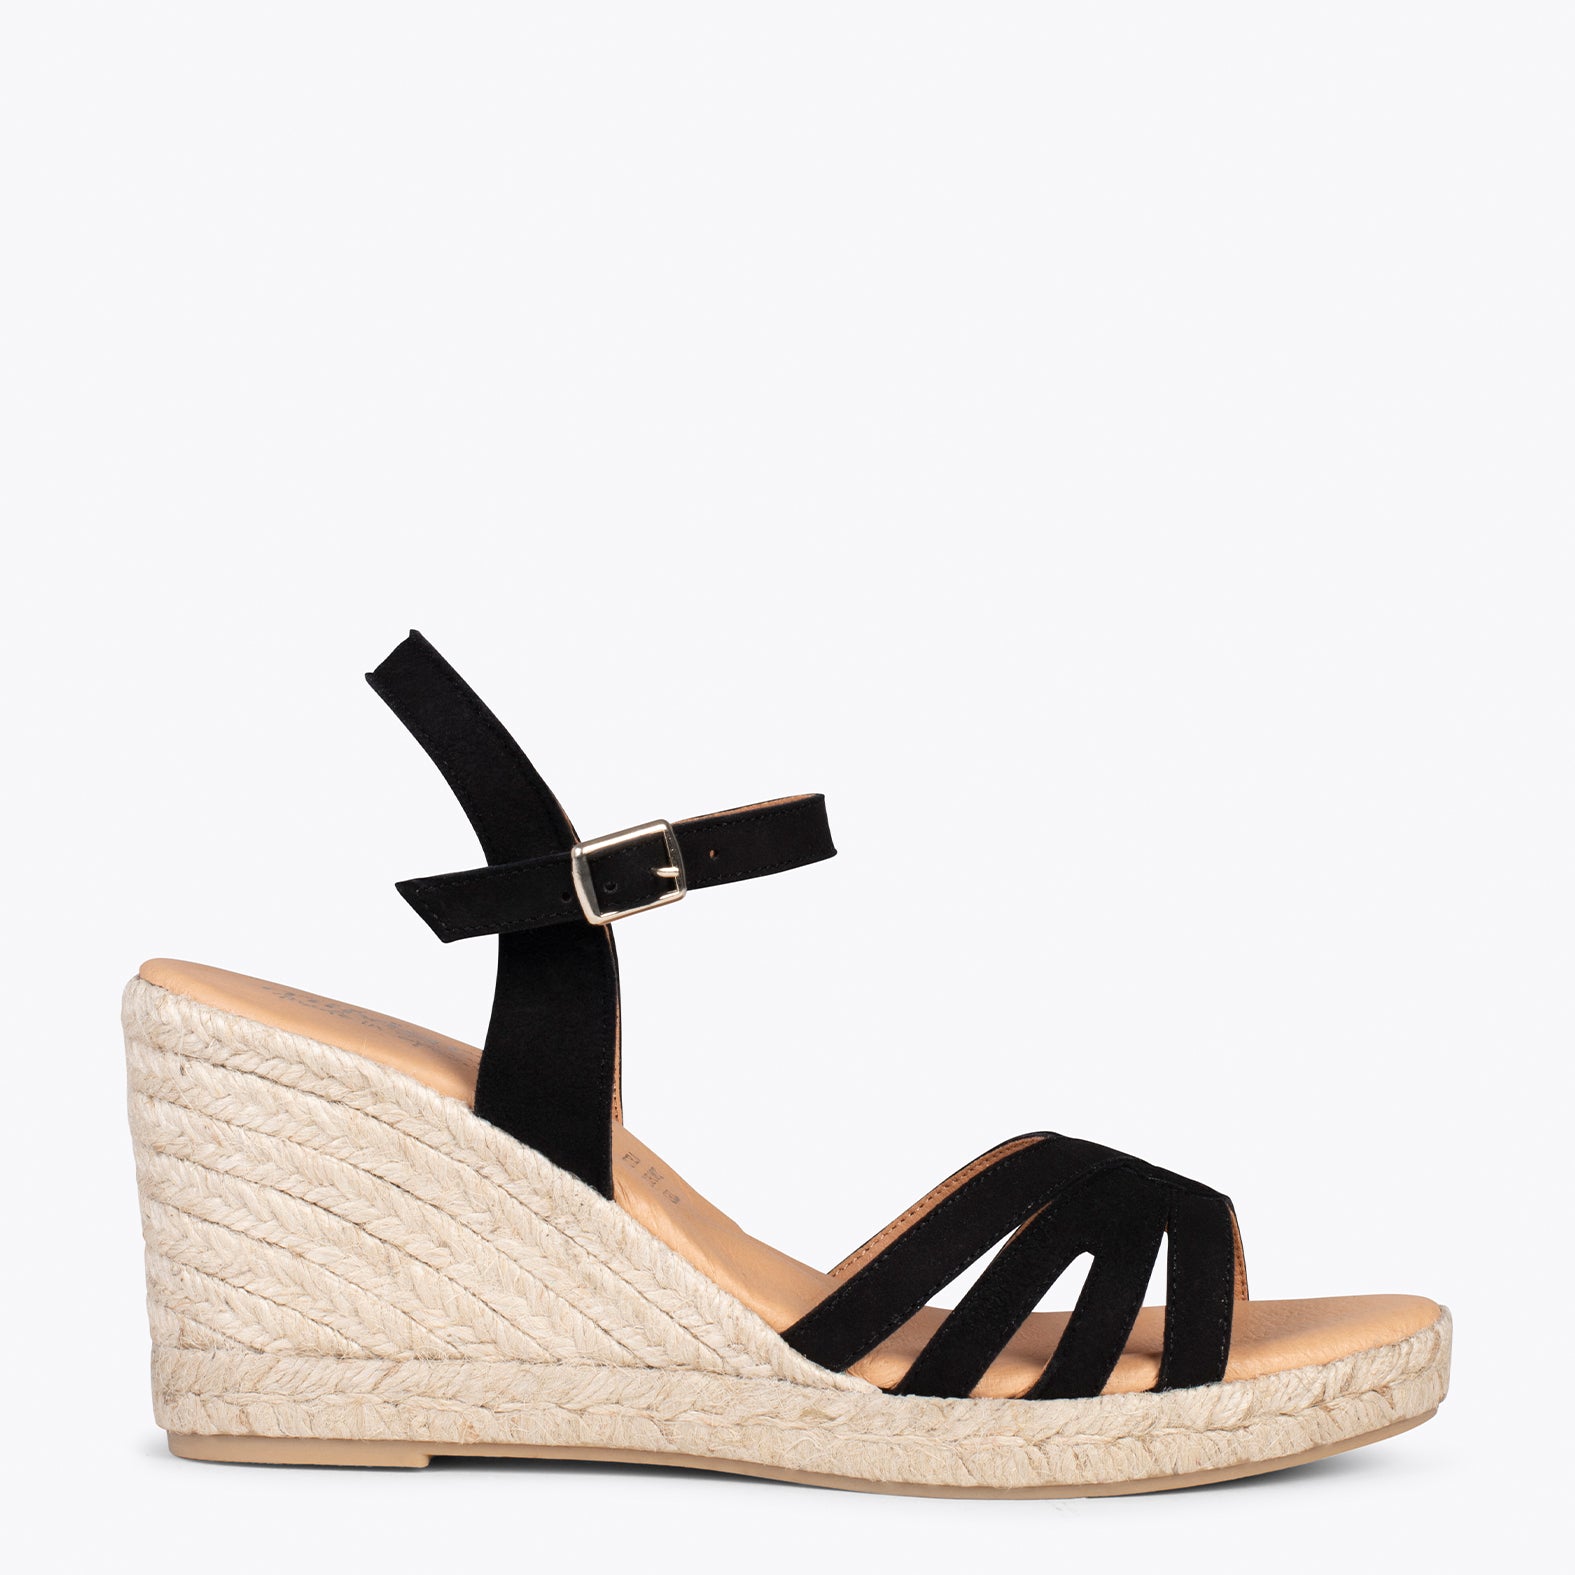 HOYAMBRE – BLACK espadrilles with braided front